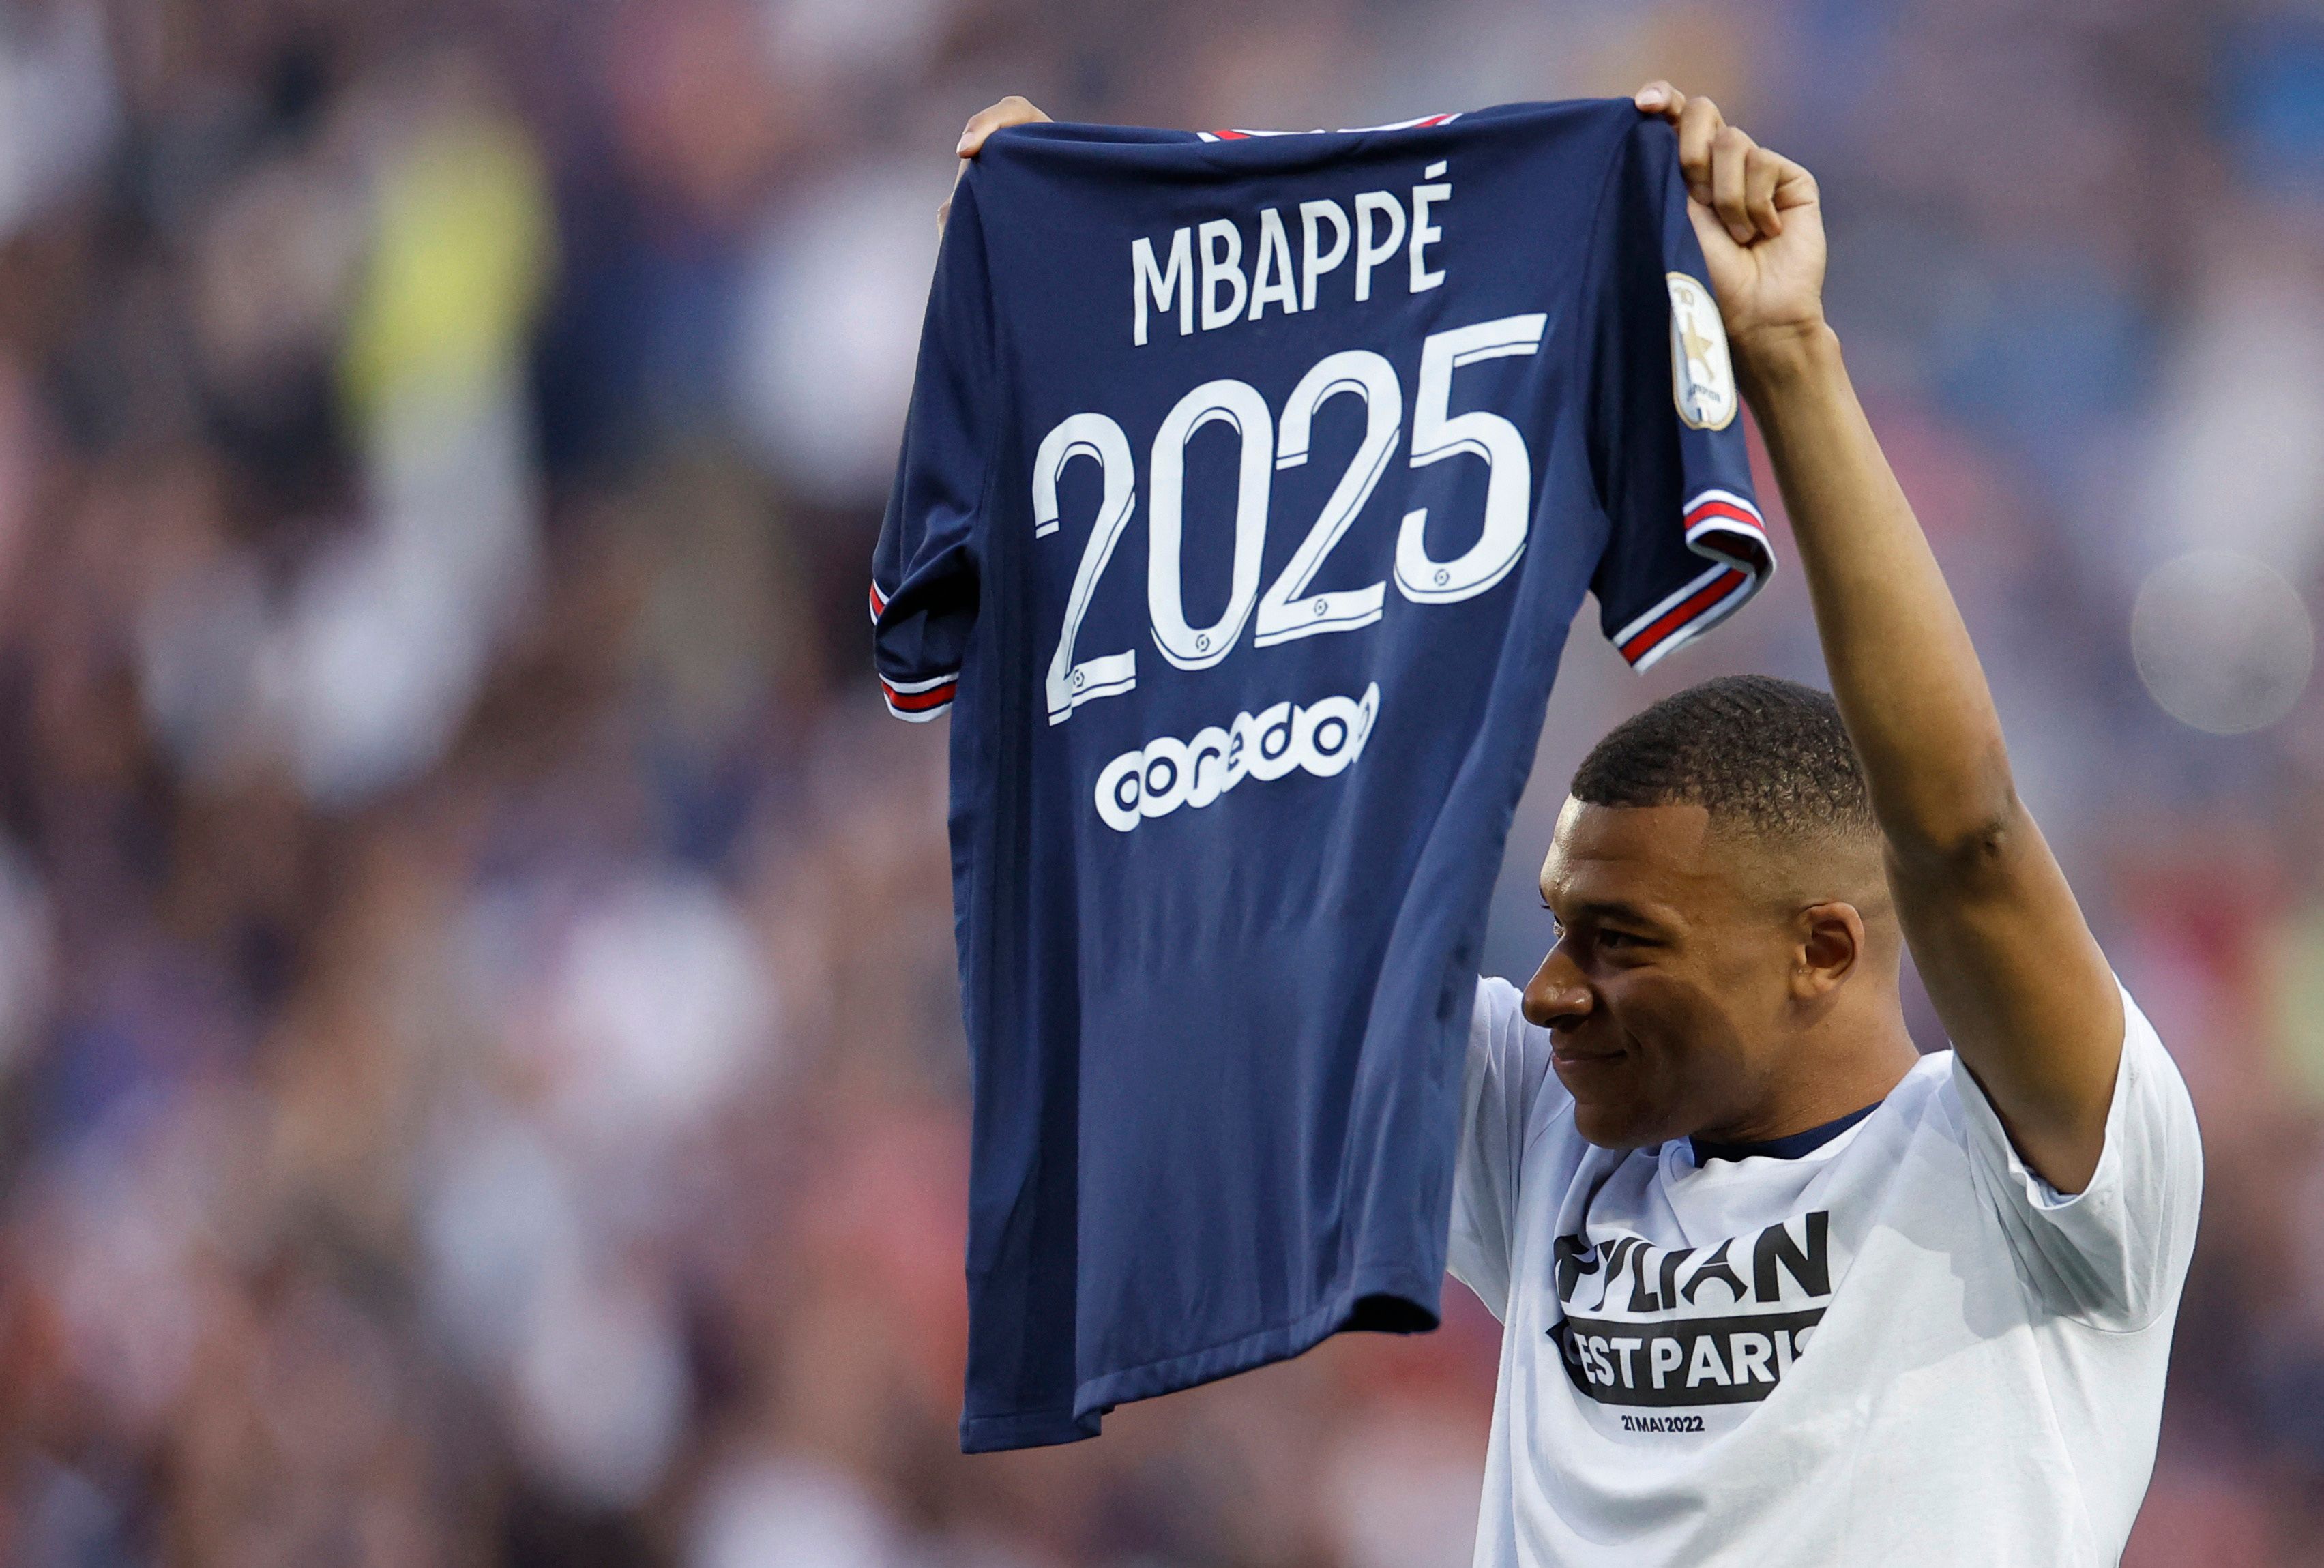 Kylian Mbappe after signing new contract at Paris Saint-Germain